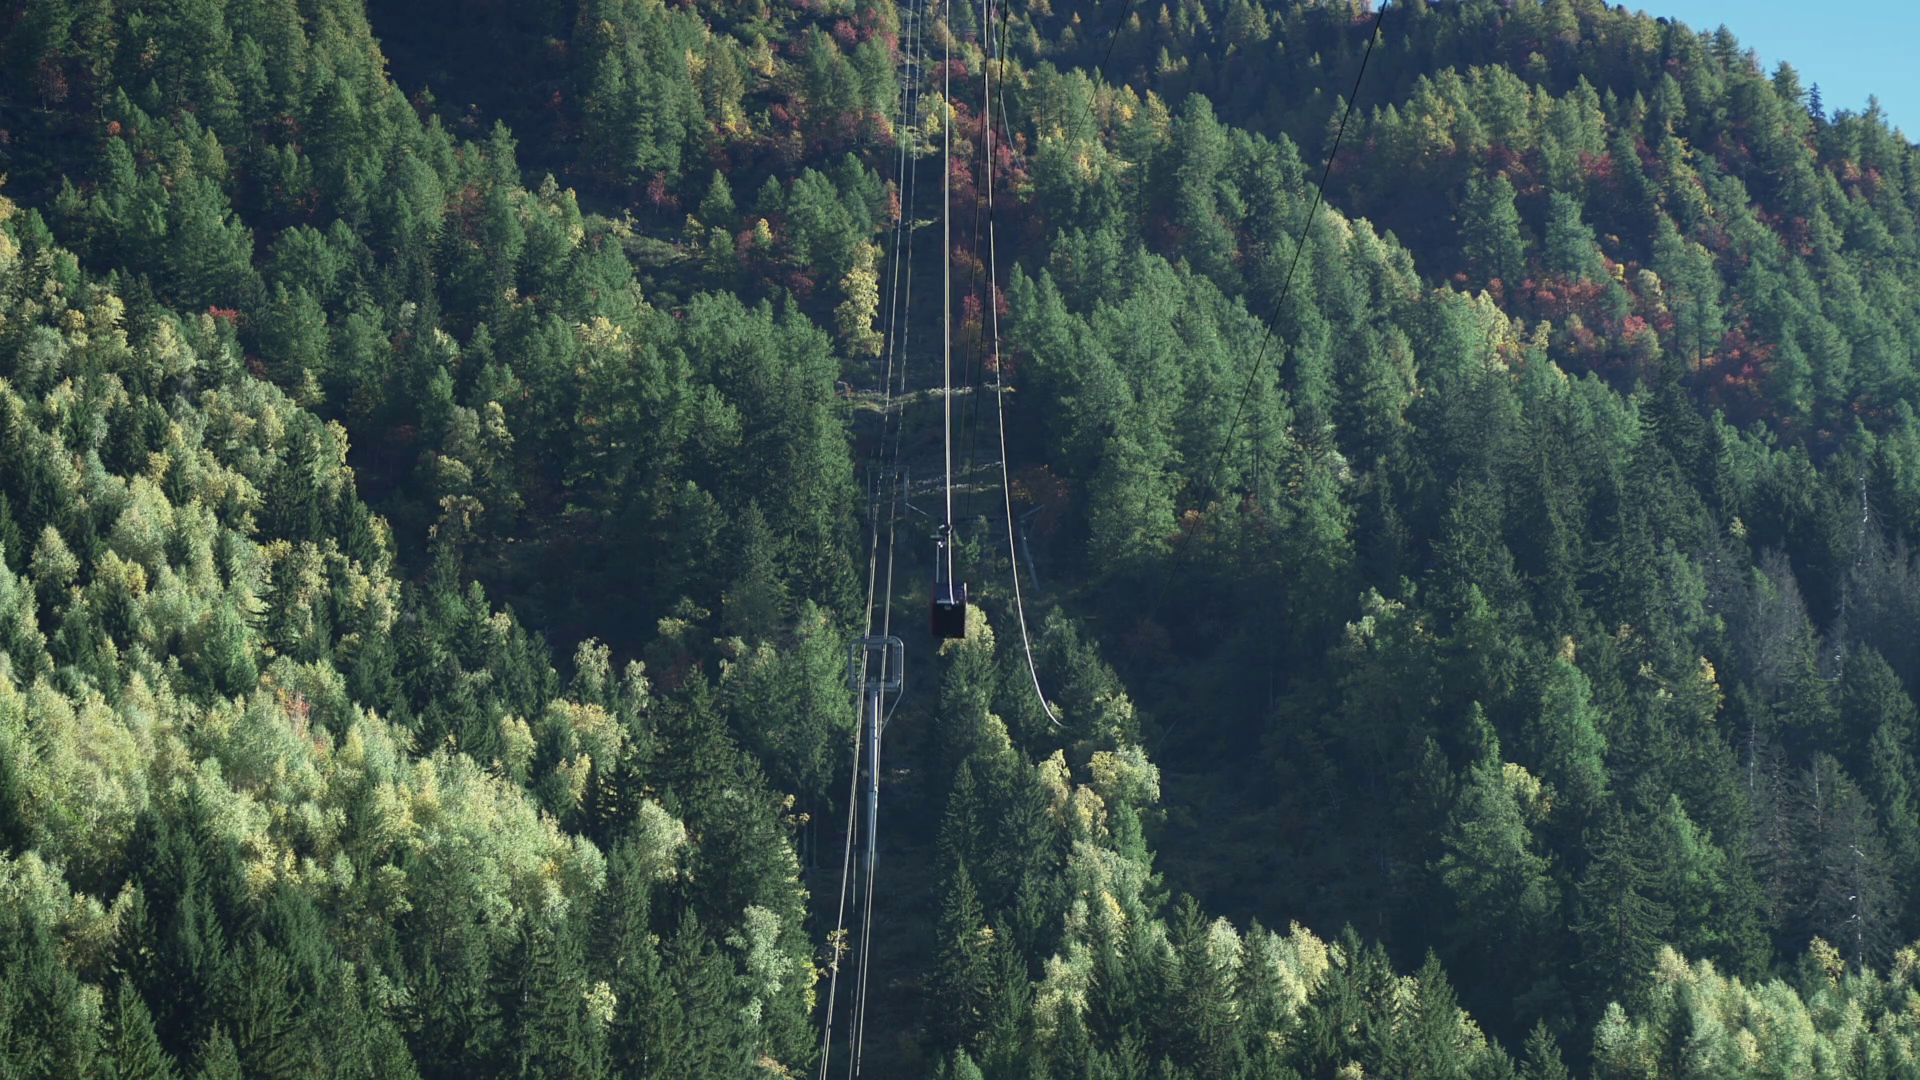 Alpine Forest in Autumn with Cable Car Hanging from Overhead Cables ...